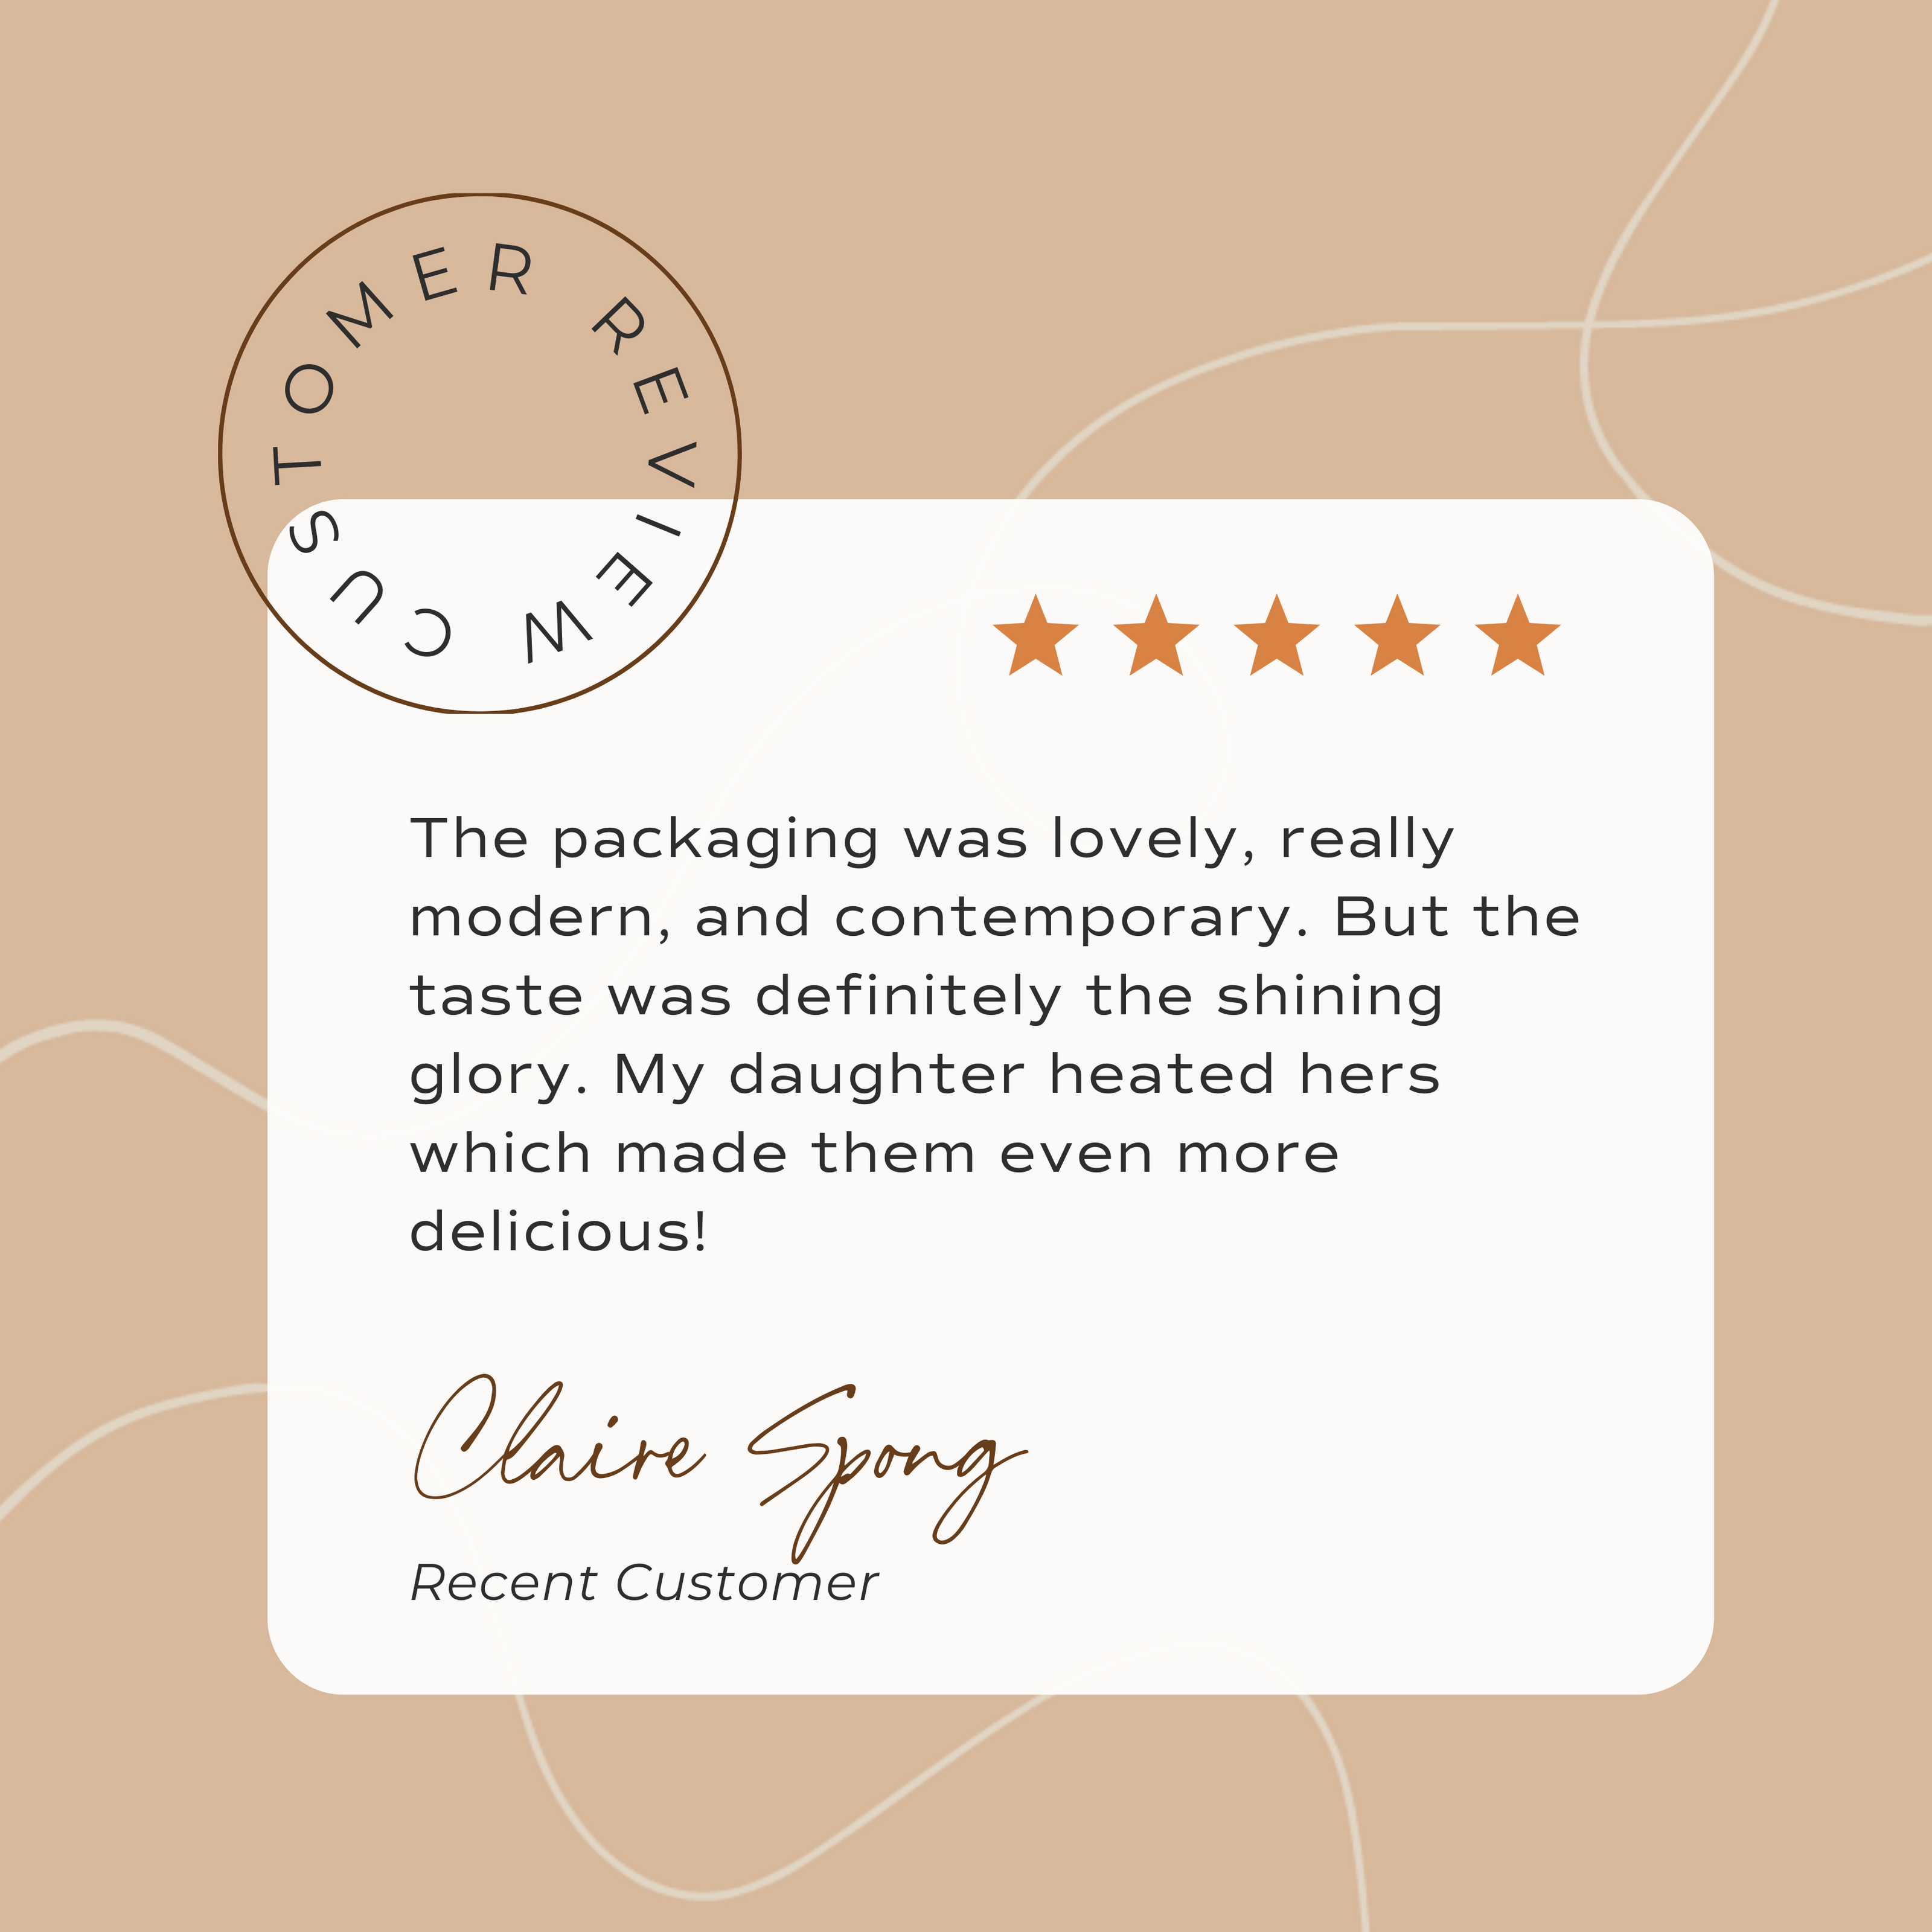 5 star customer review for Cinnamon Buns from Claire